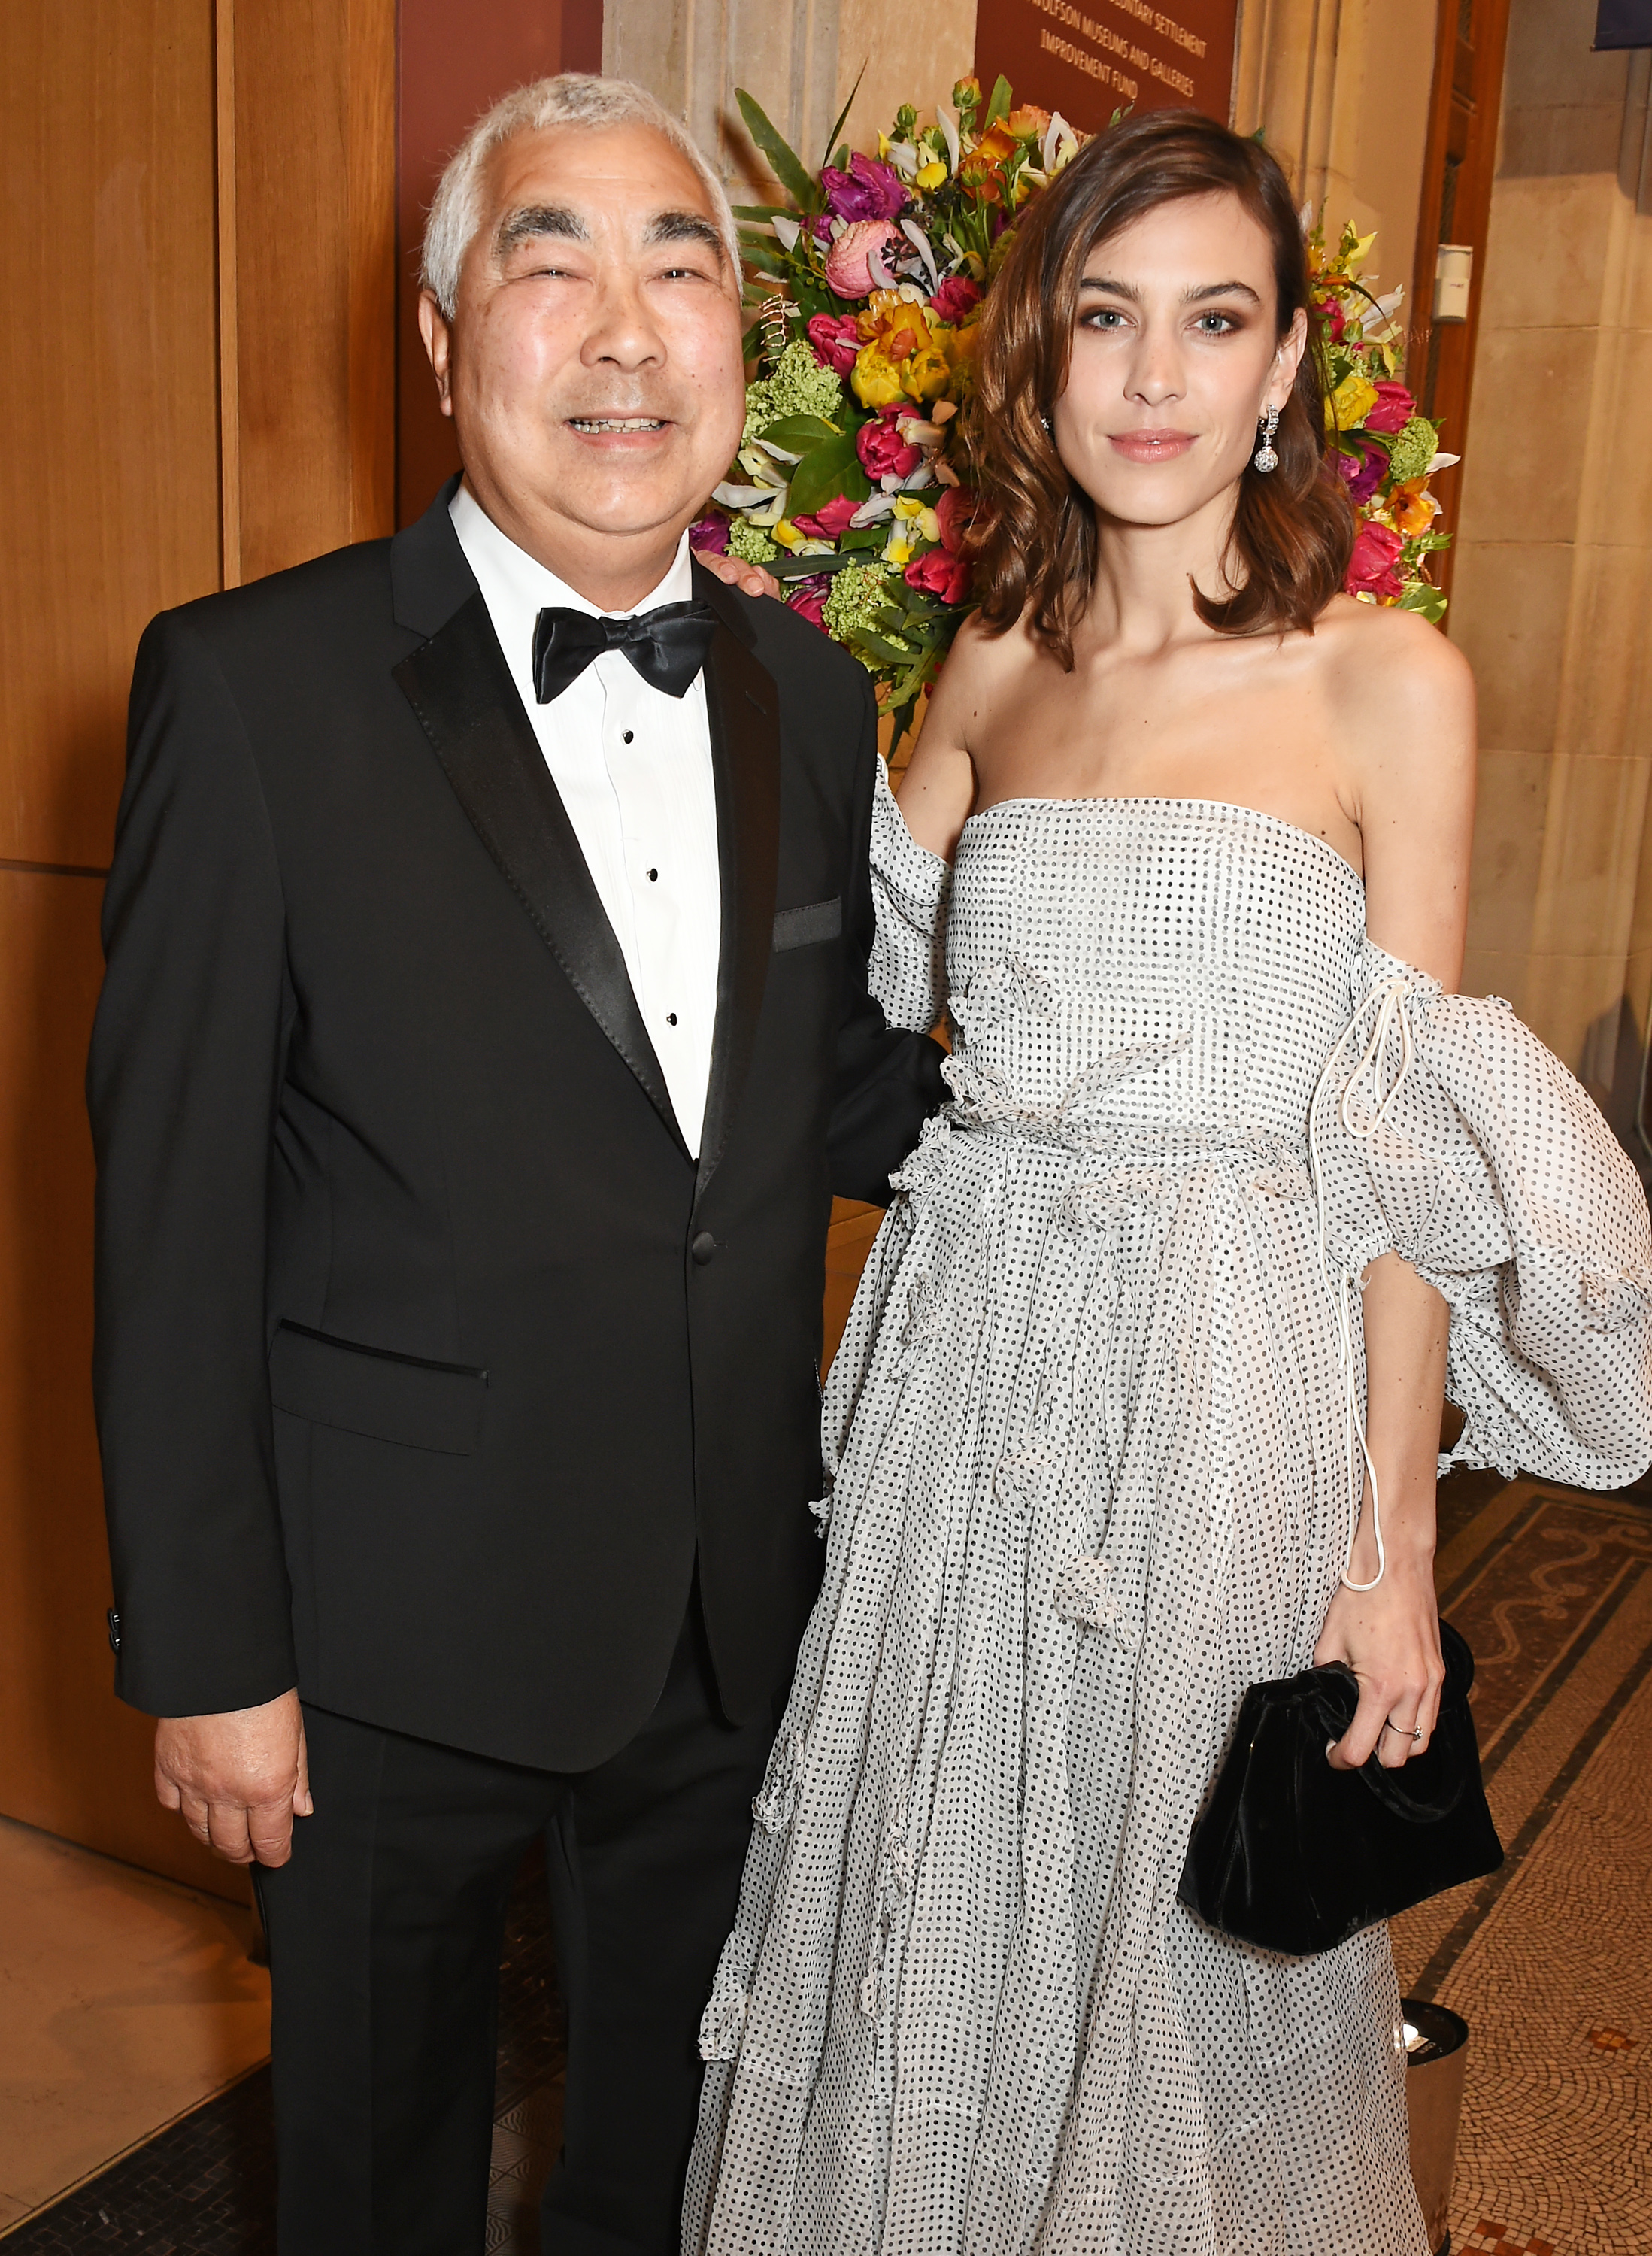 Alexa Chung and Philip Chung during the Portrait Gala 2017 at the National Portrait Gallery on March 28, 2017, in London, England. | Source: Getty Images